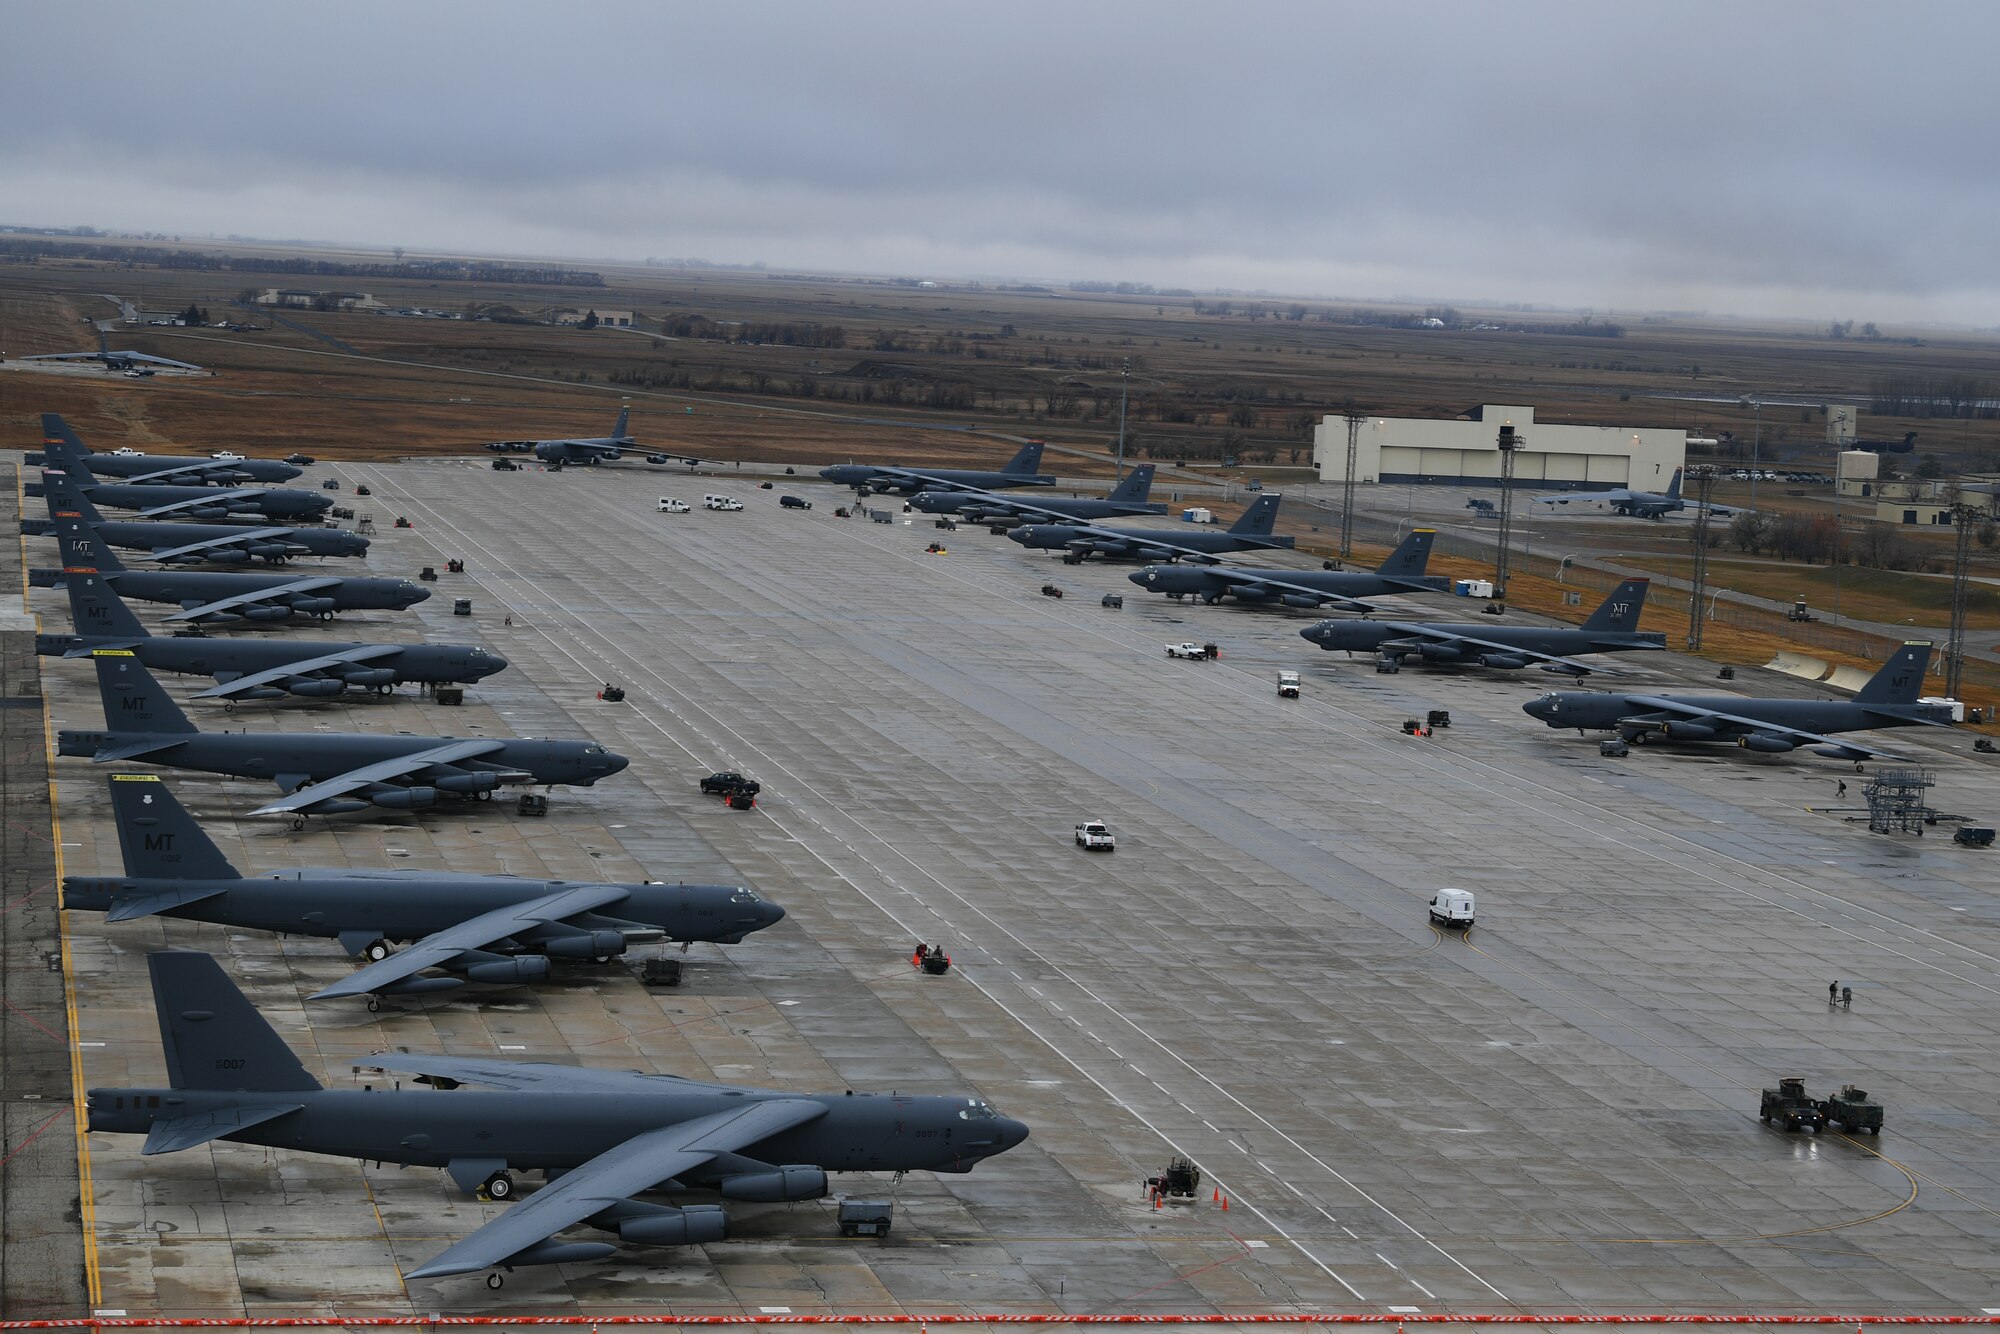 Rows of B-52H Stratofortresses sit ready on the flightline during Global Thunder 19 at Minot Air Force Base, N.D., Nov. 2, 2018. Global Thunder is a U.S. Strategic Command (USSTRATCOM) exercise designed to provide training opportunities to test and validate command, control and operational procedures. The training is based on a notional scenario developed to drive execution of USSTRATCOM and component forces'; ability to support the geographic combatant commands, deter adversaries and, if necessary, employ forces as directed by the President of the United States. (U.S. Air Force photo by Tech. Sgt. Jarad A. Denton)